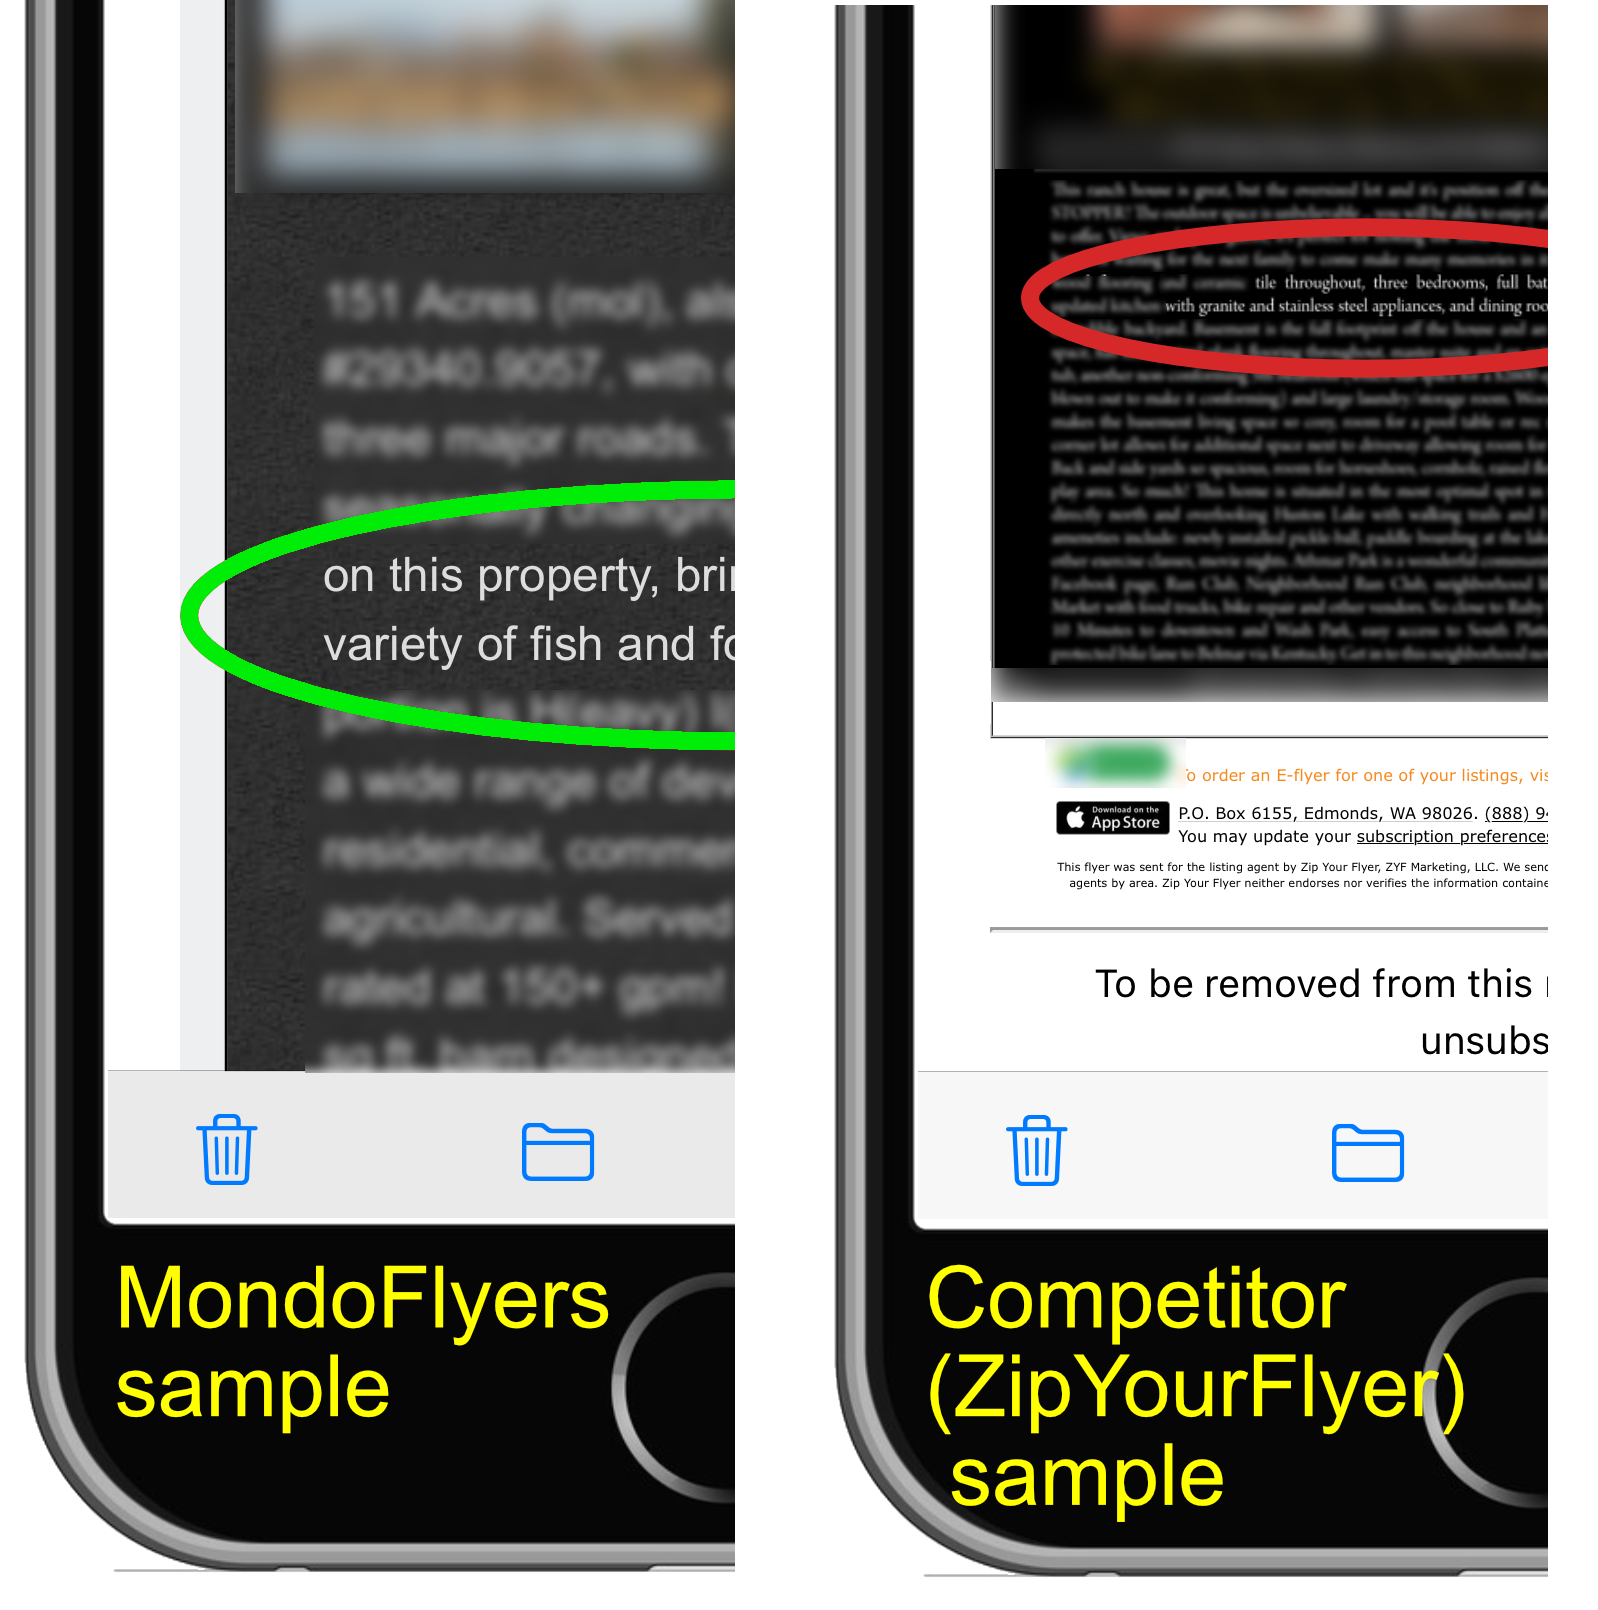 Side-by-side smartphones show competitor eflyer text too small to read easily while MondoFlyers remain readable on any size screen.